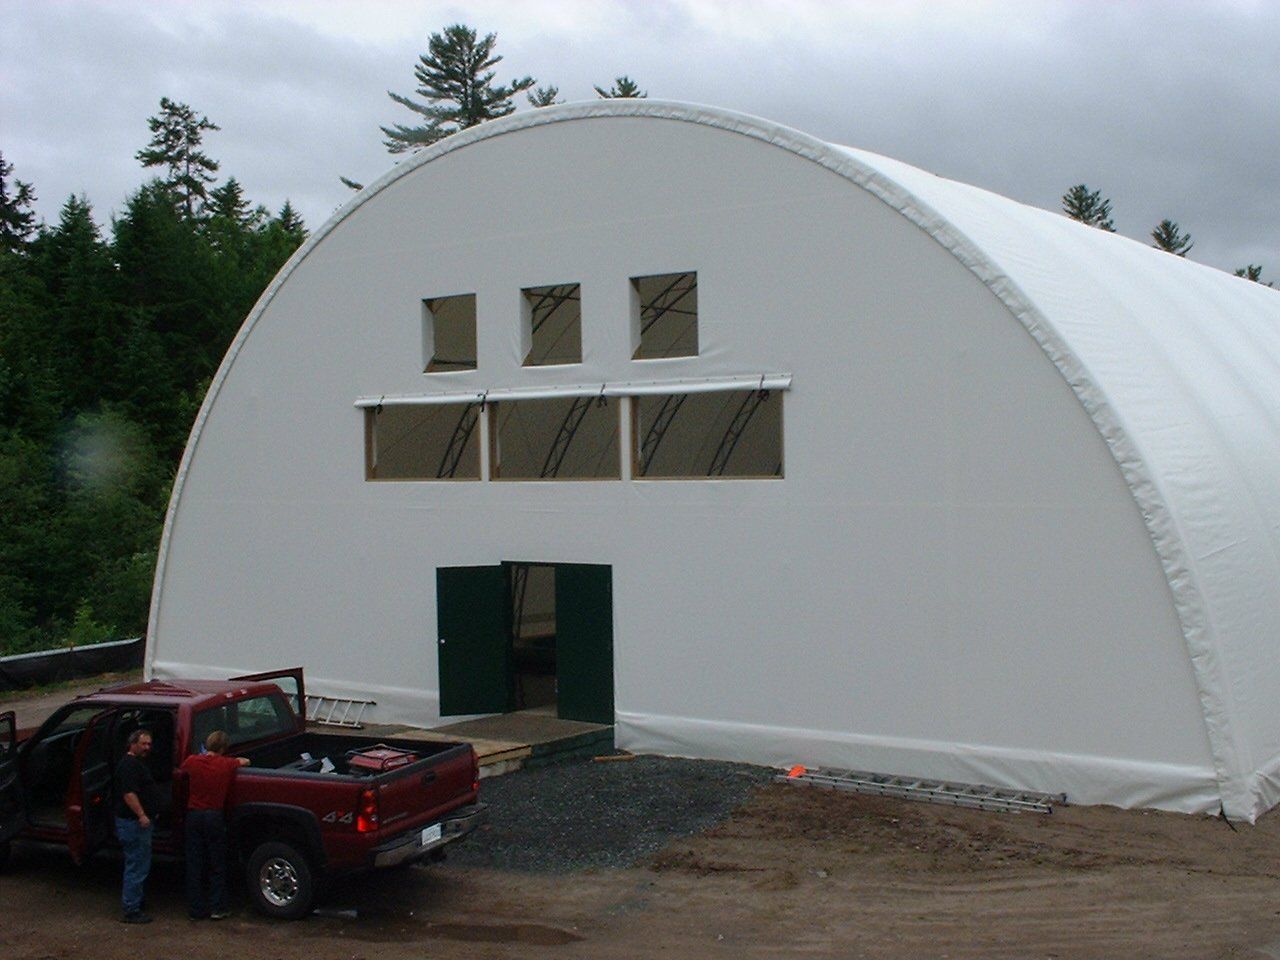 DOME BUILDINGS fabric buildings 55' x 150' covering salmon tanks